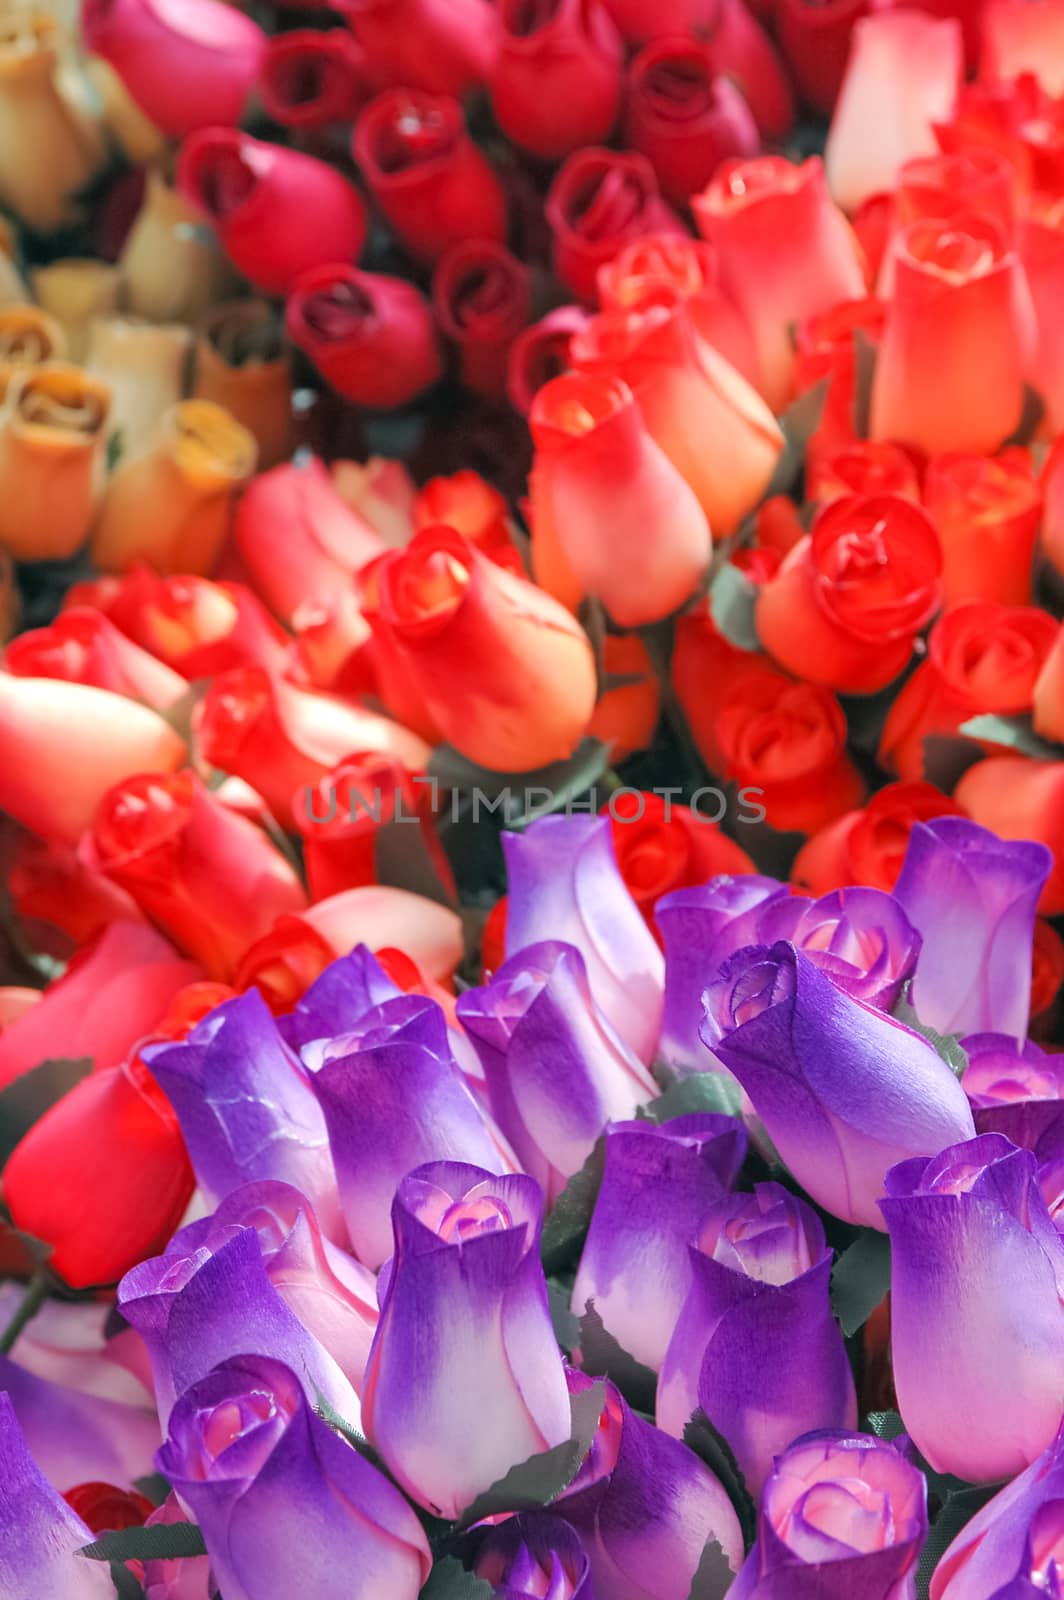 display of colorful artificial paper roses